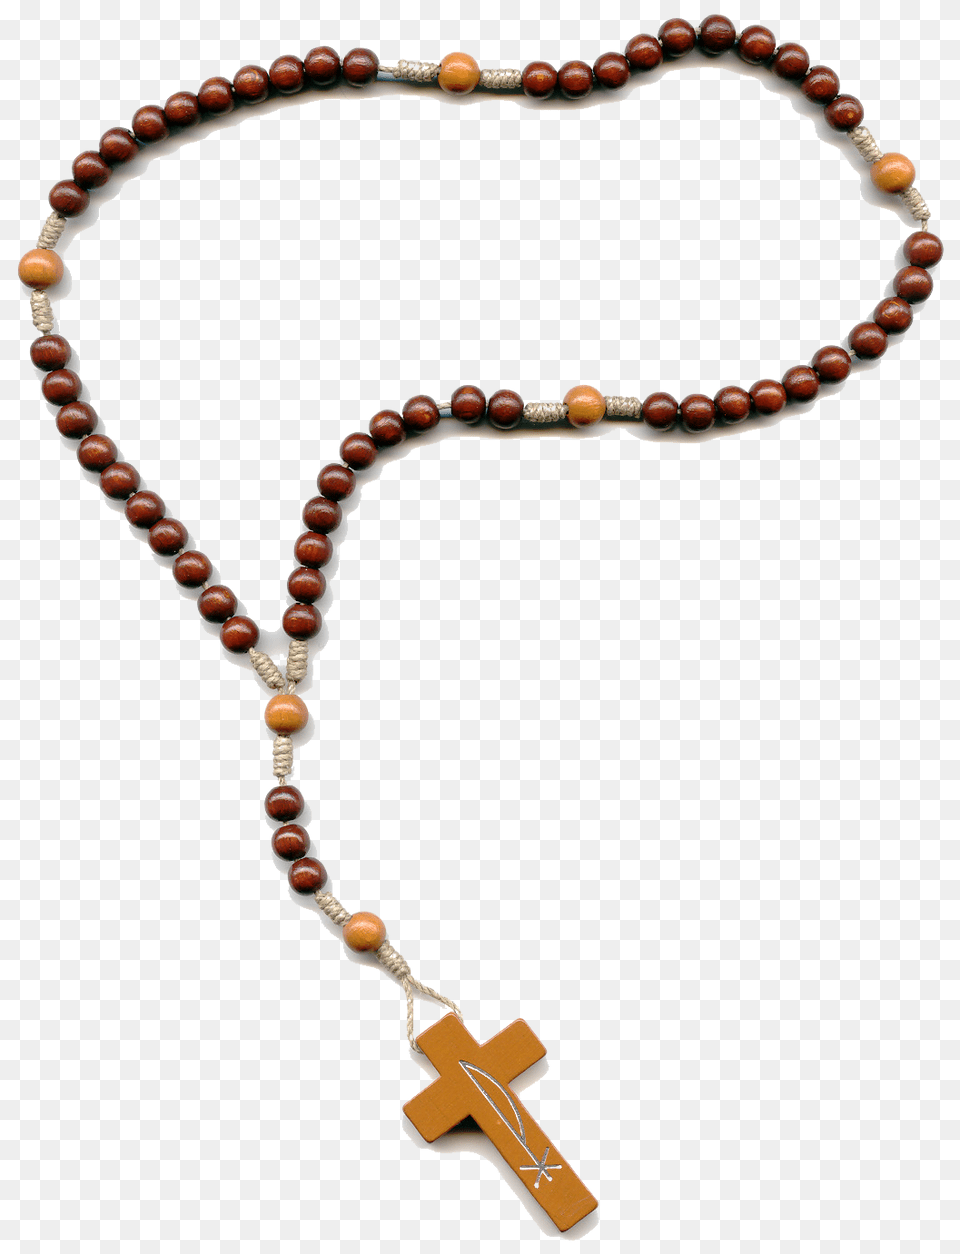 The Rosary St Therese Of Lisieux, Accessories, Ornament, Necklace, Jewelry Png